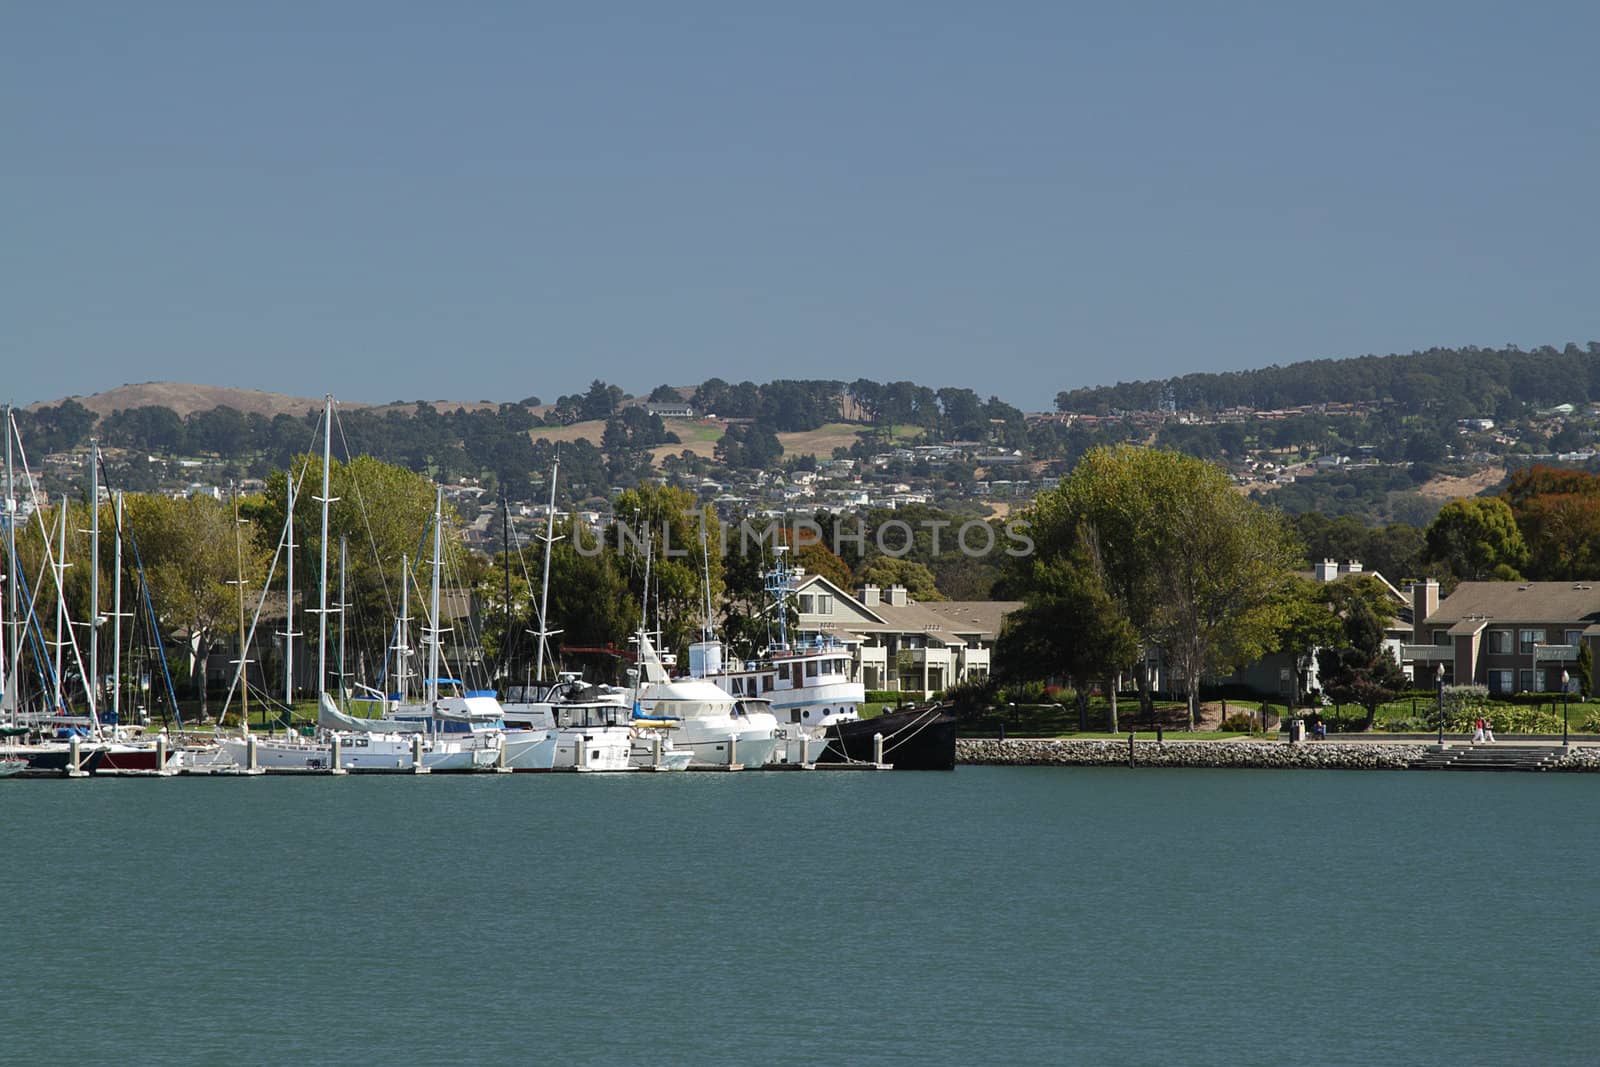 Row of sailboats on the piers and houses